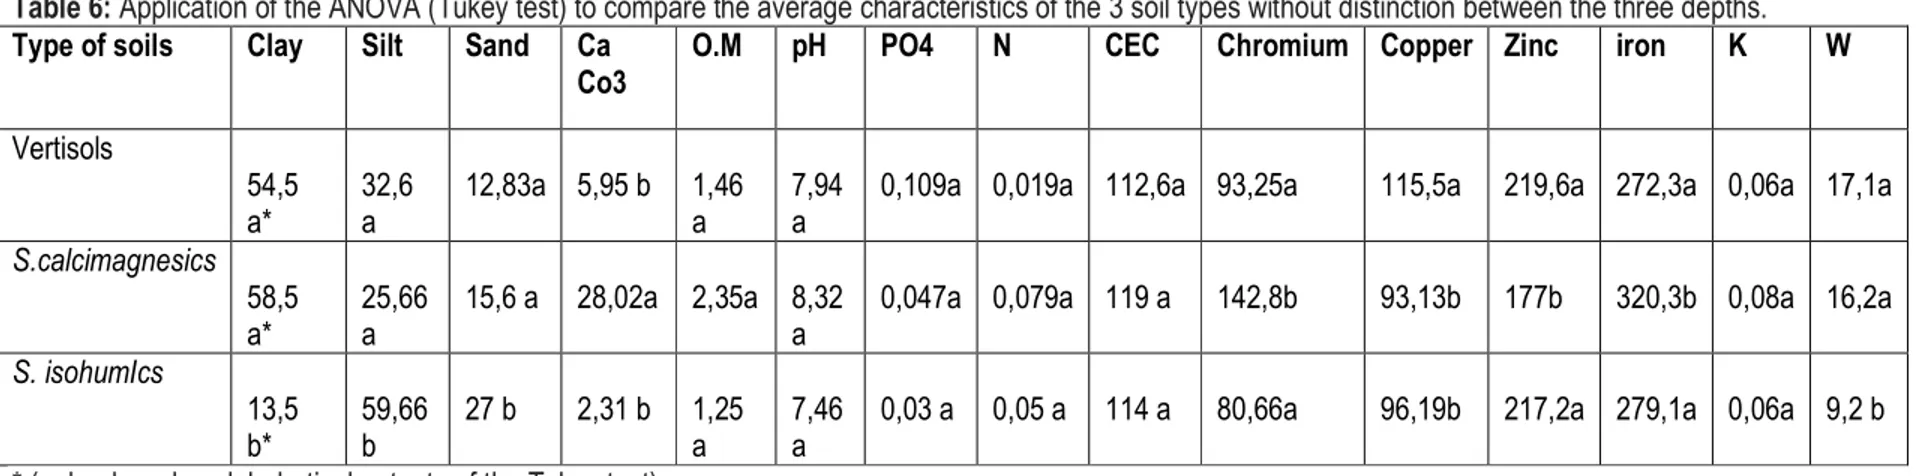 Table 6: Application of the ANOVA (Tukey test) to compare the average characteristics of the 3 soil types without distinction between the three depths